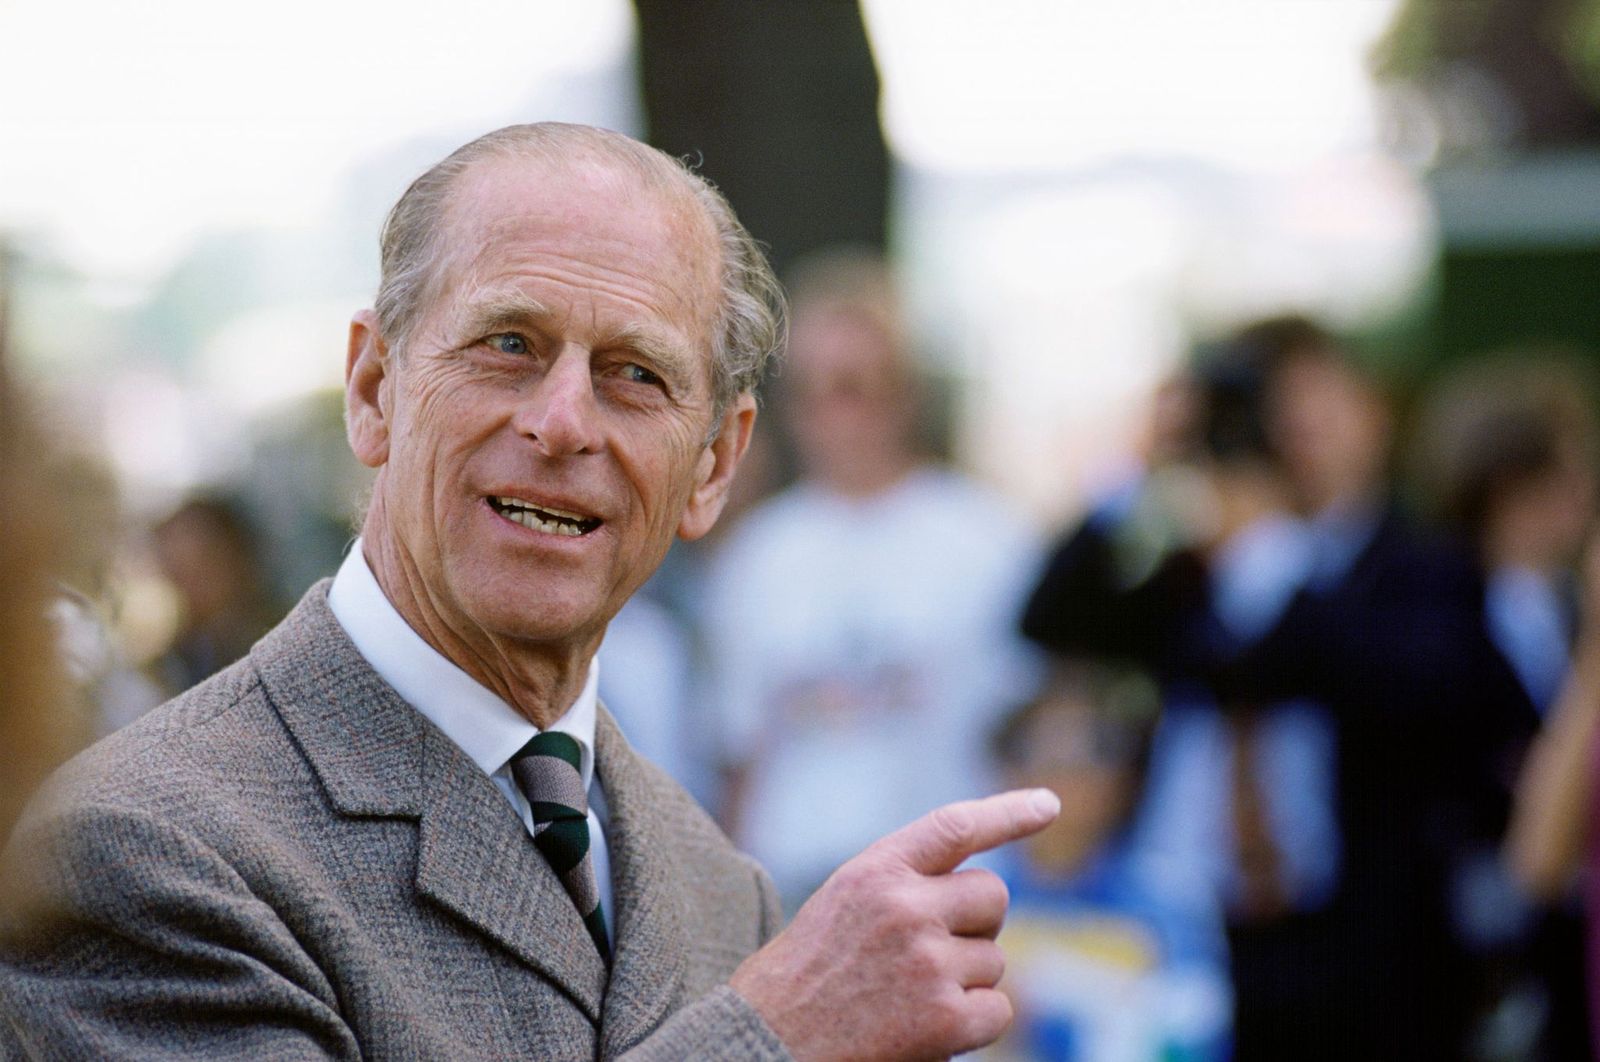 Prince Philip at The Windsor Horse Show on May 17, 1992 | Photo: Getty Images